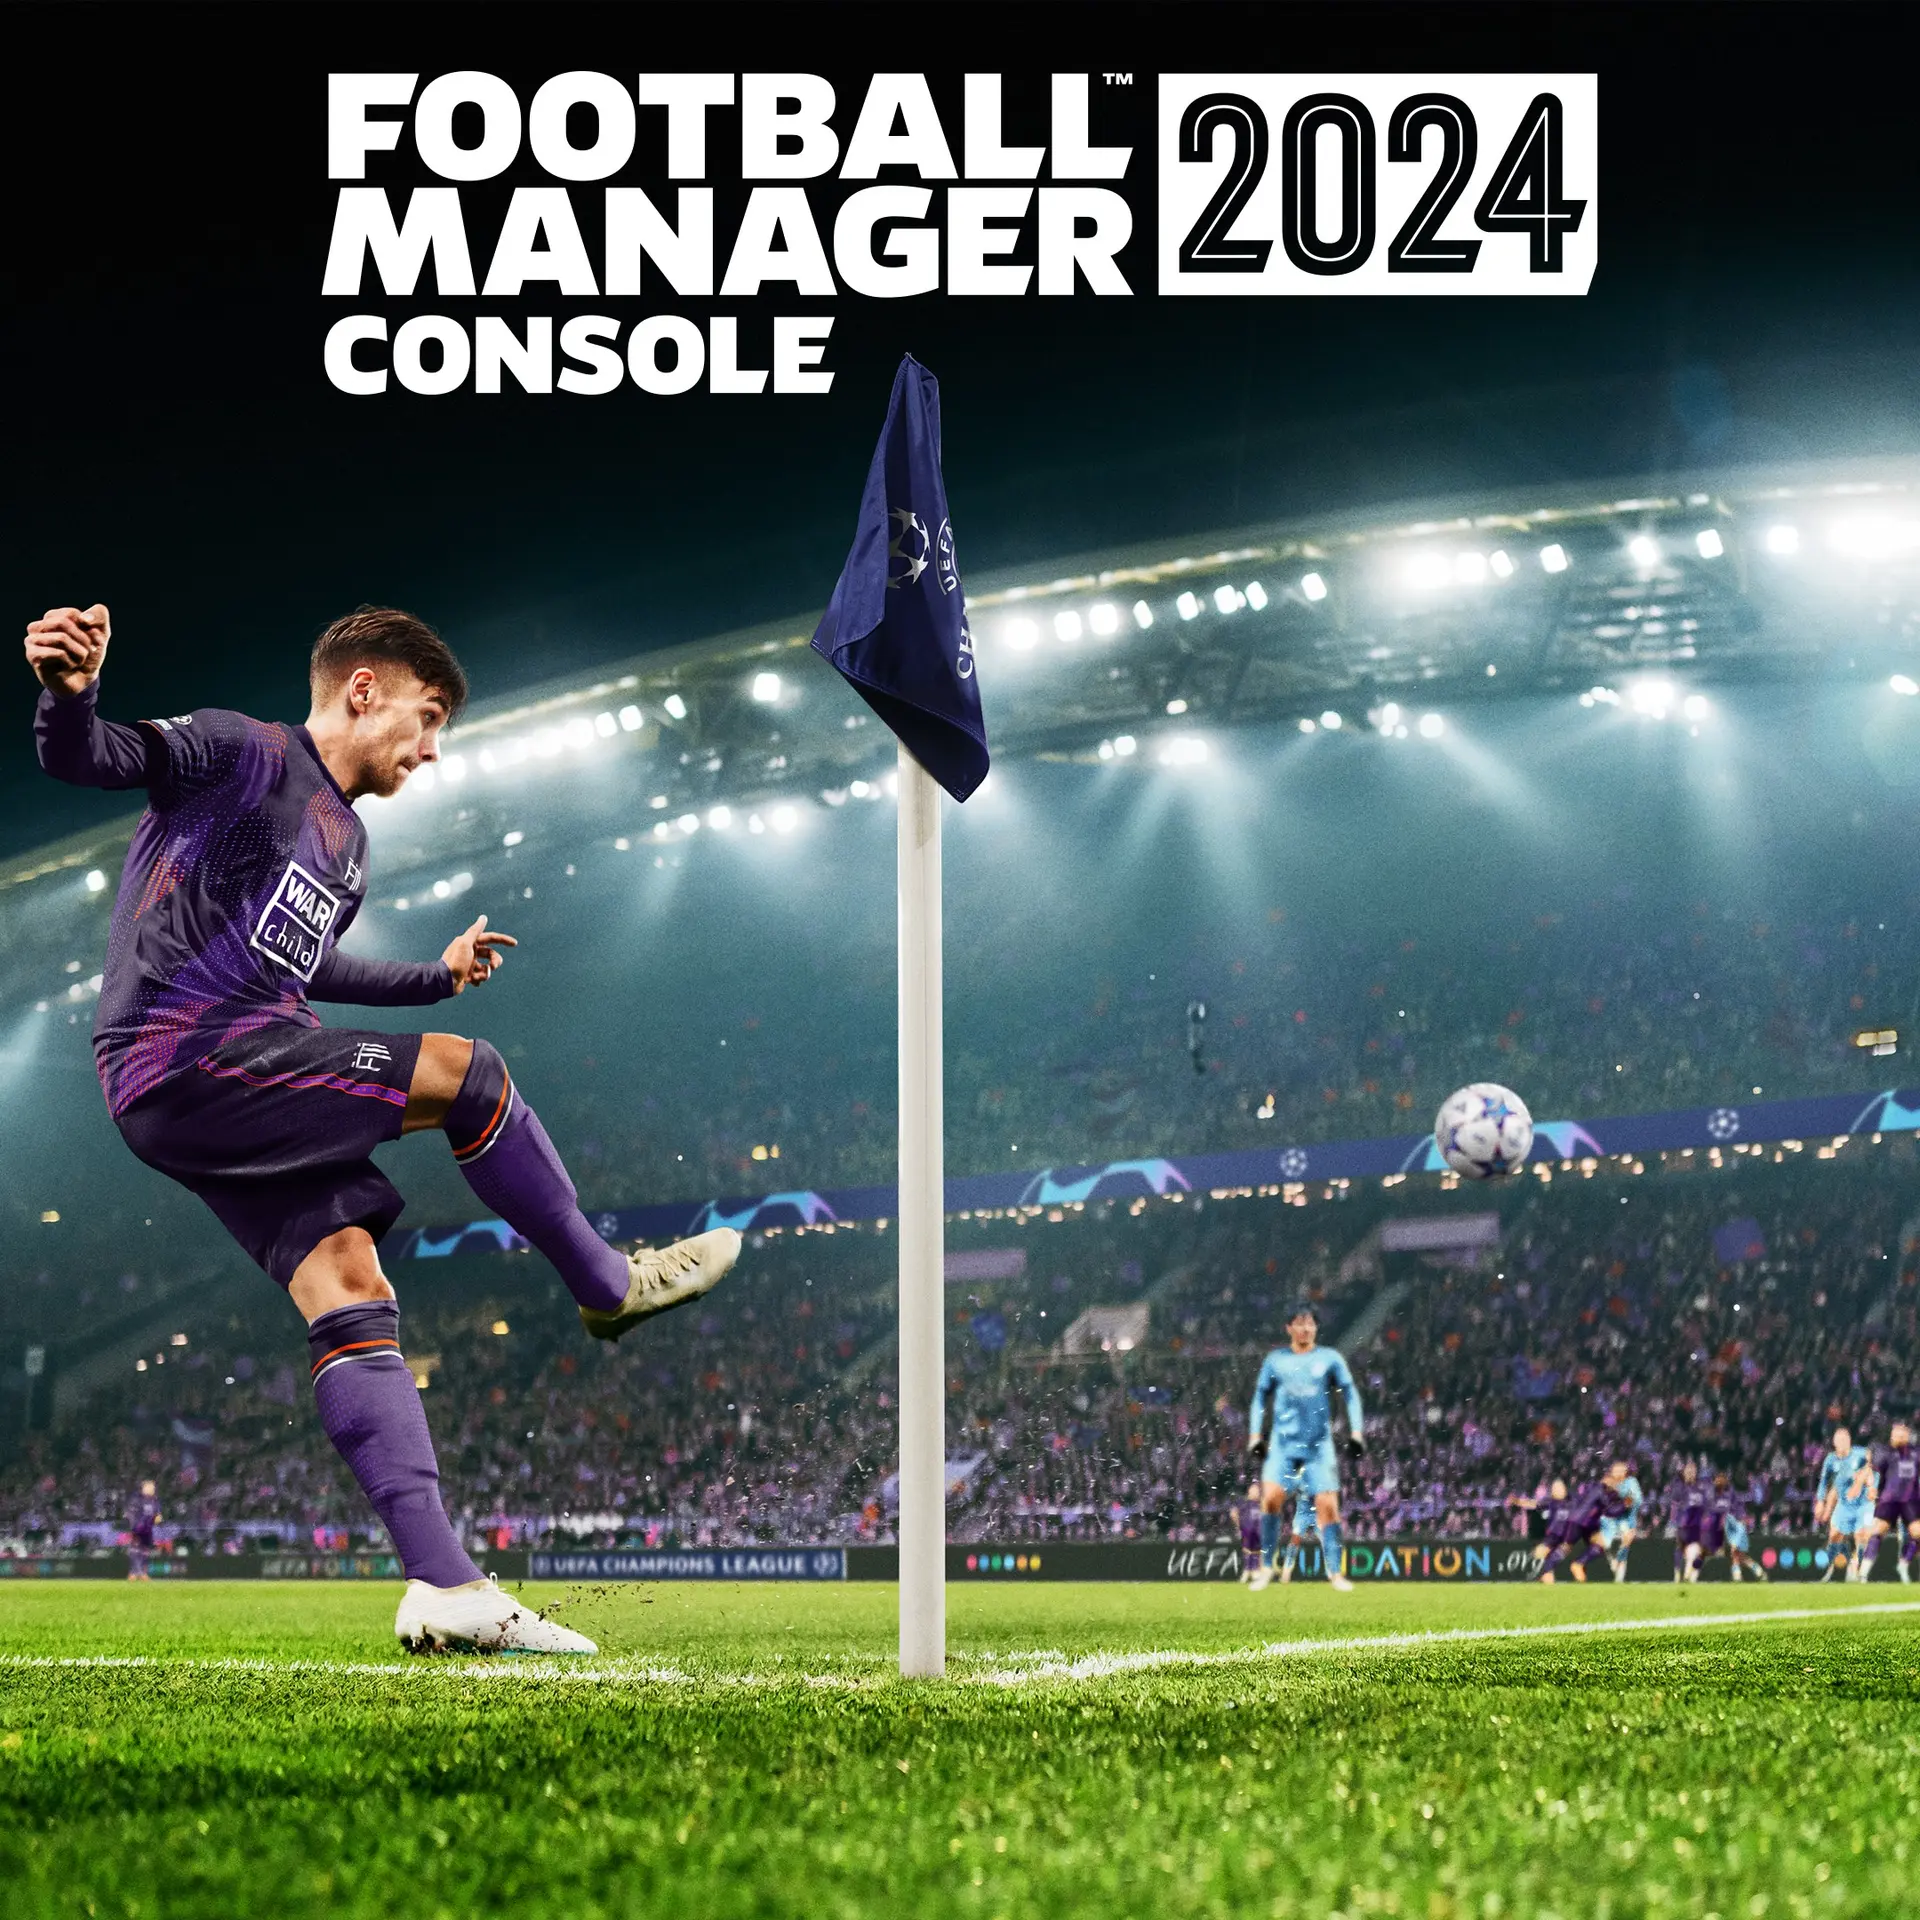 Football Manager 2024 Console (XBOX One Cheapest Store) Buy Instant